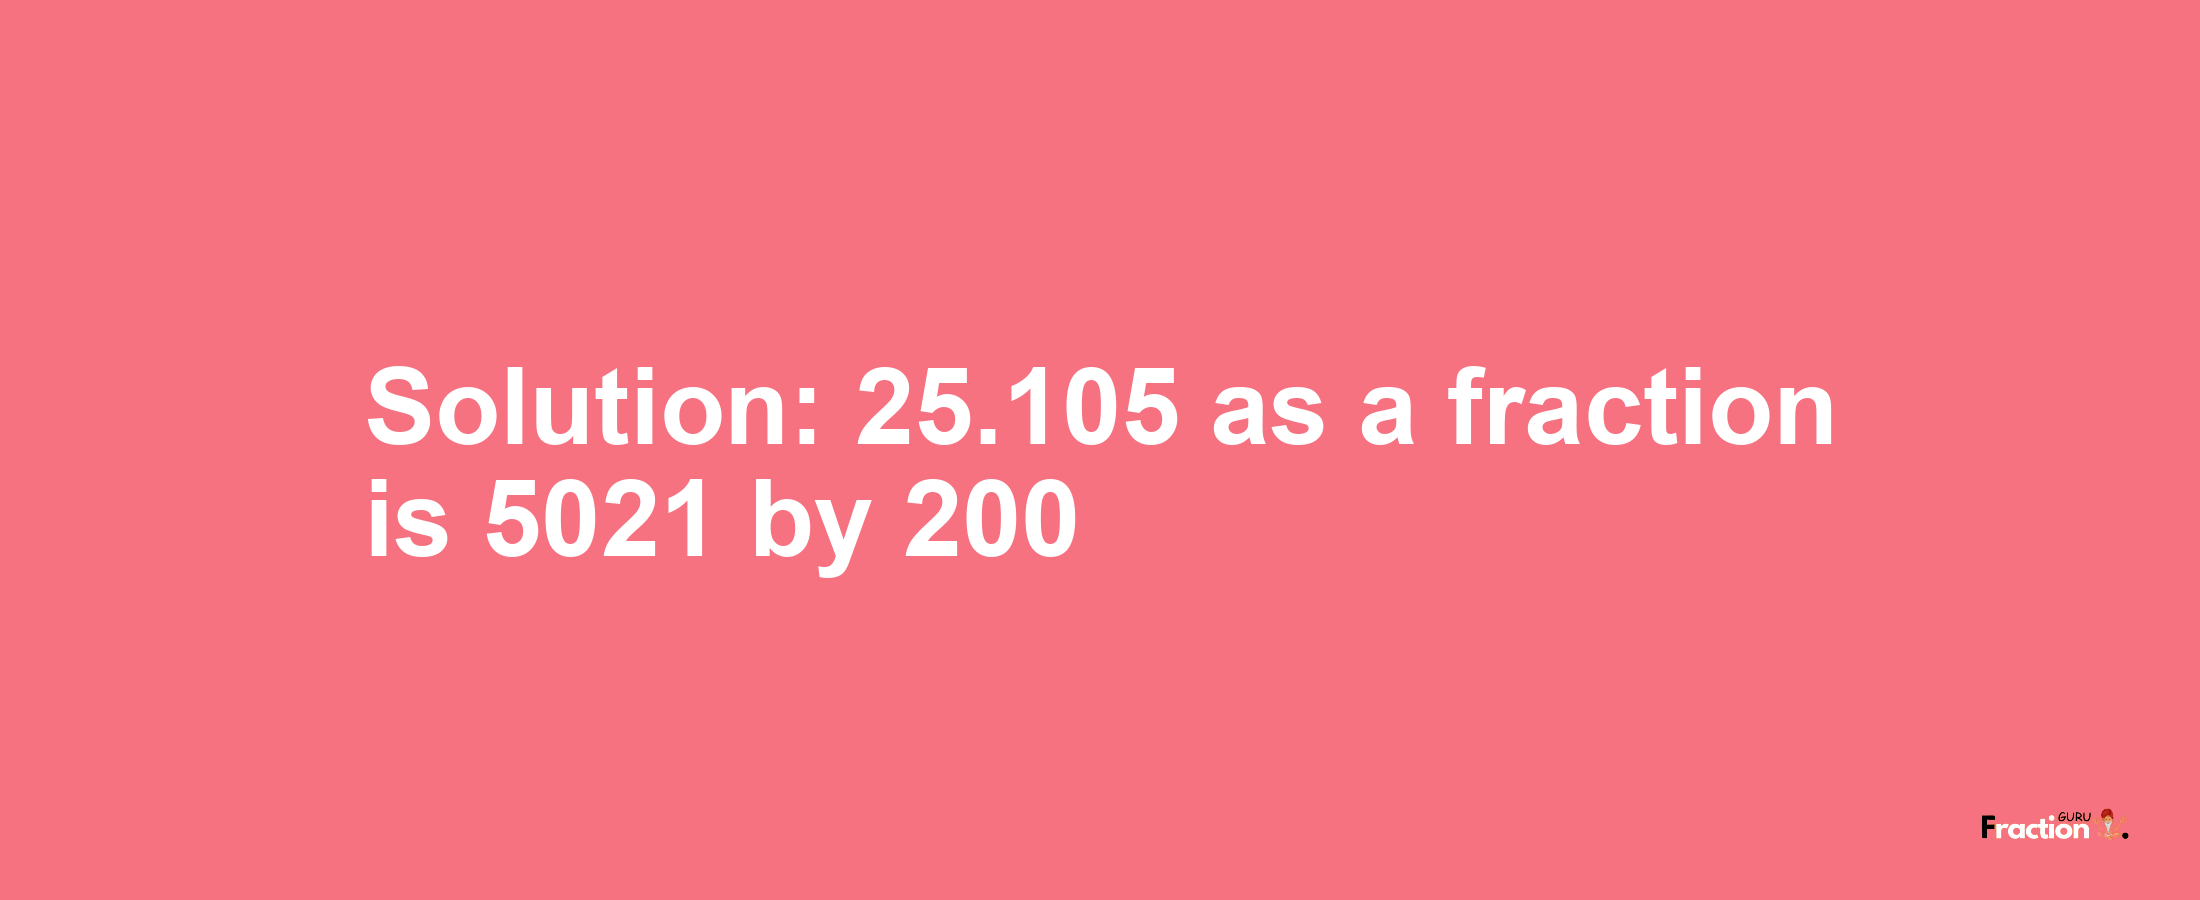 Solution:25.105 as a fraction is 5021/200